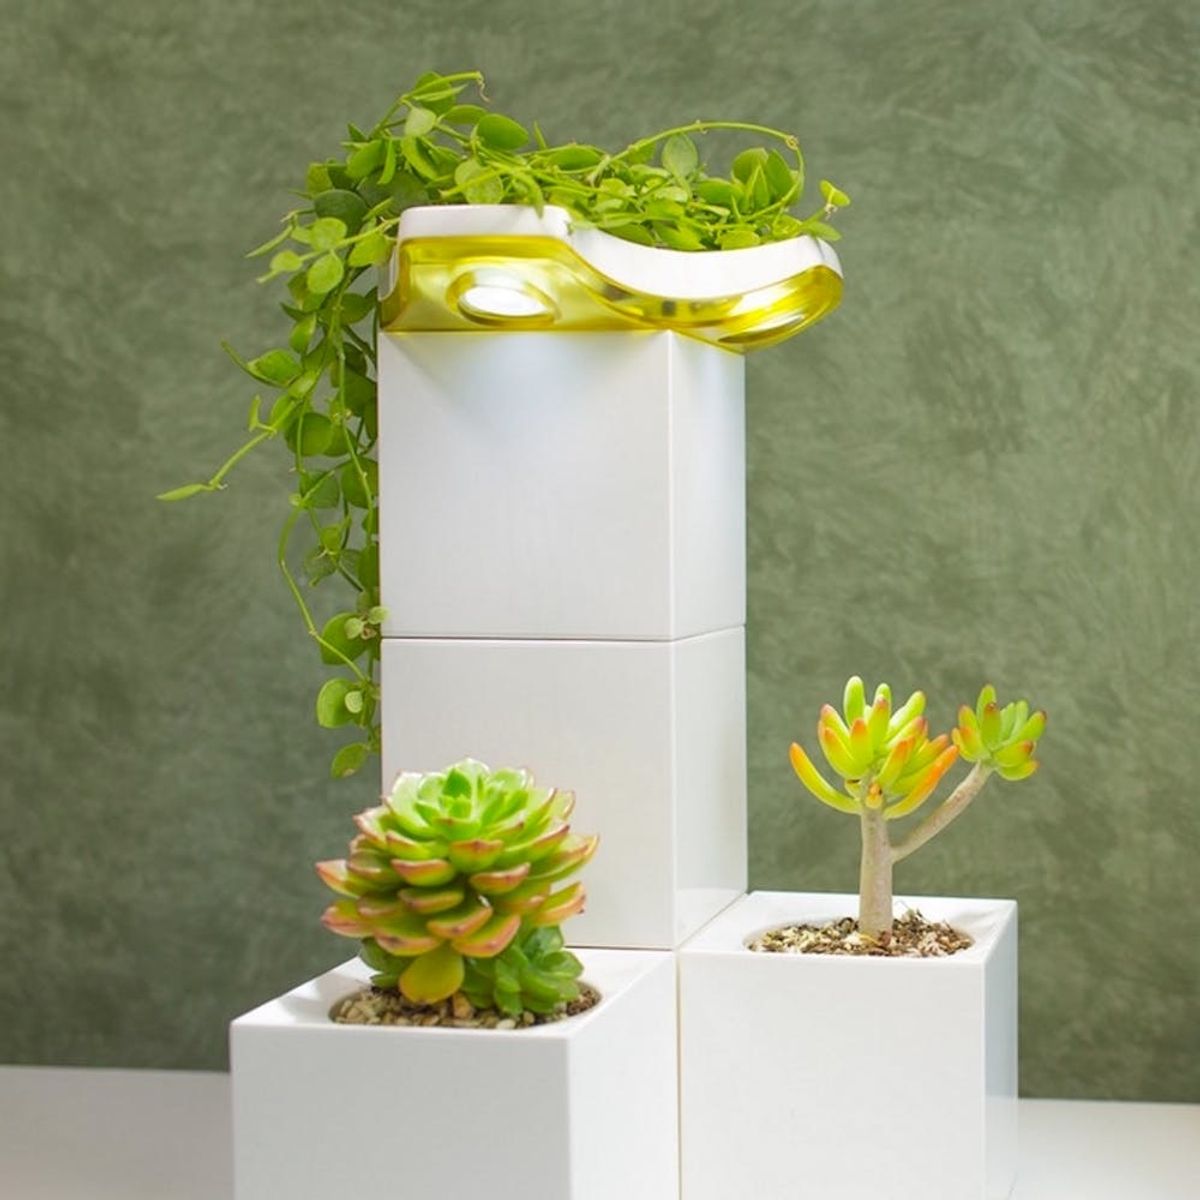 This Lego-Like Planter Is Just What Your Indoor Garden Needs